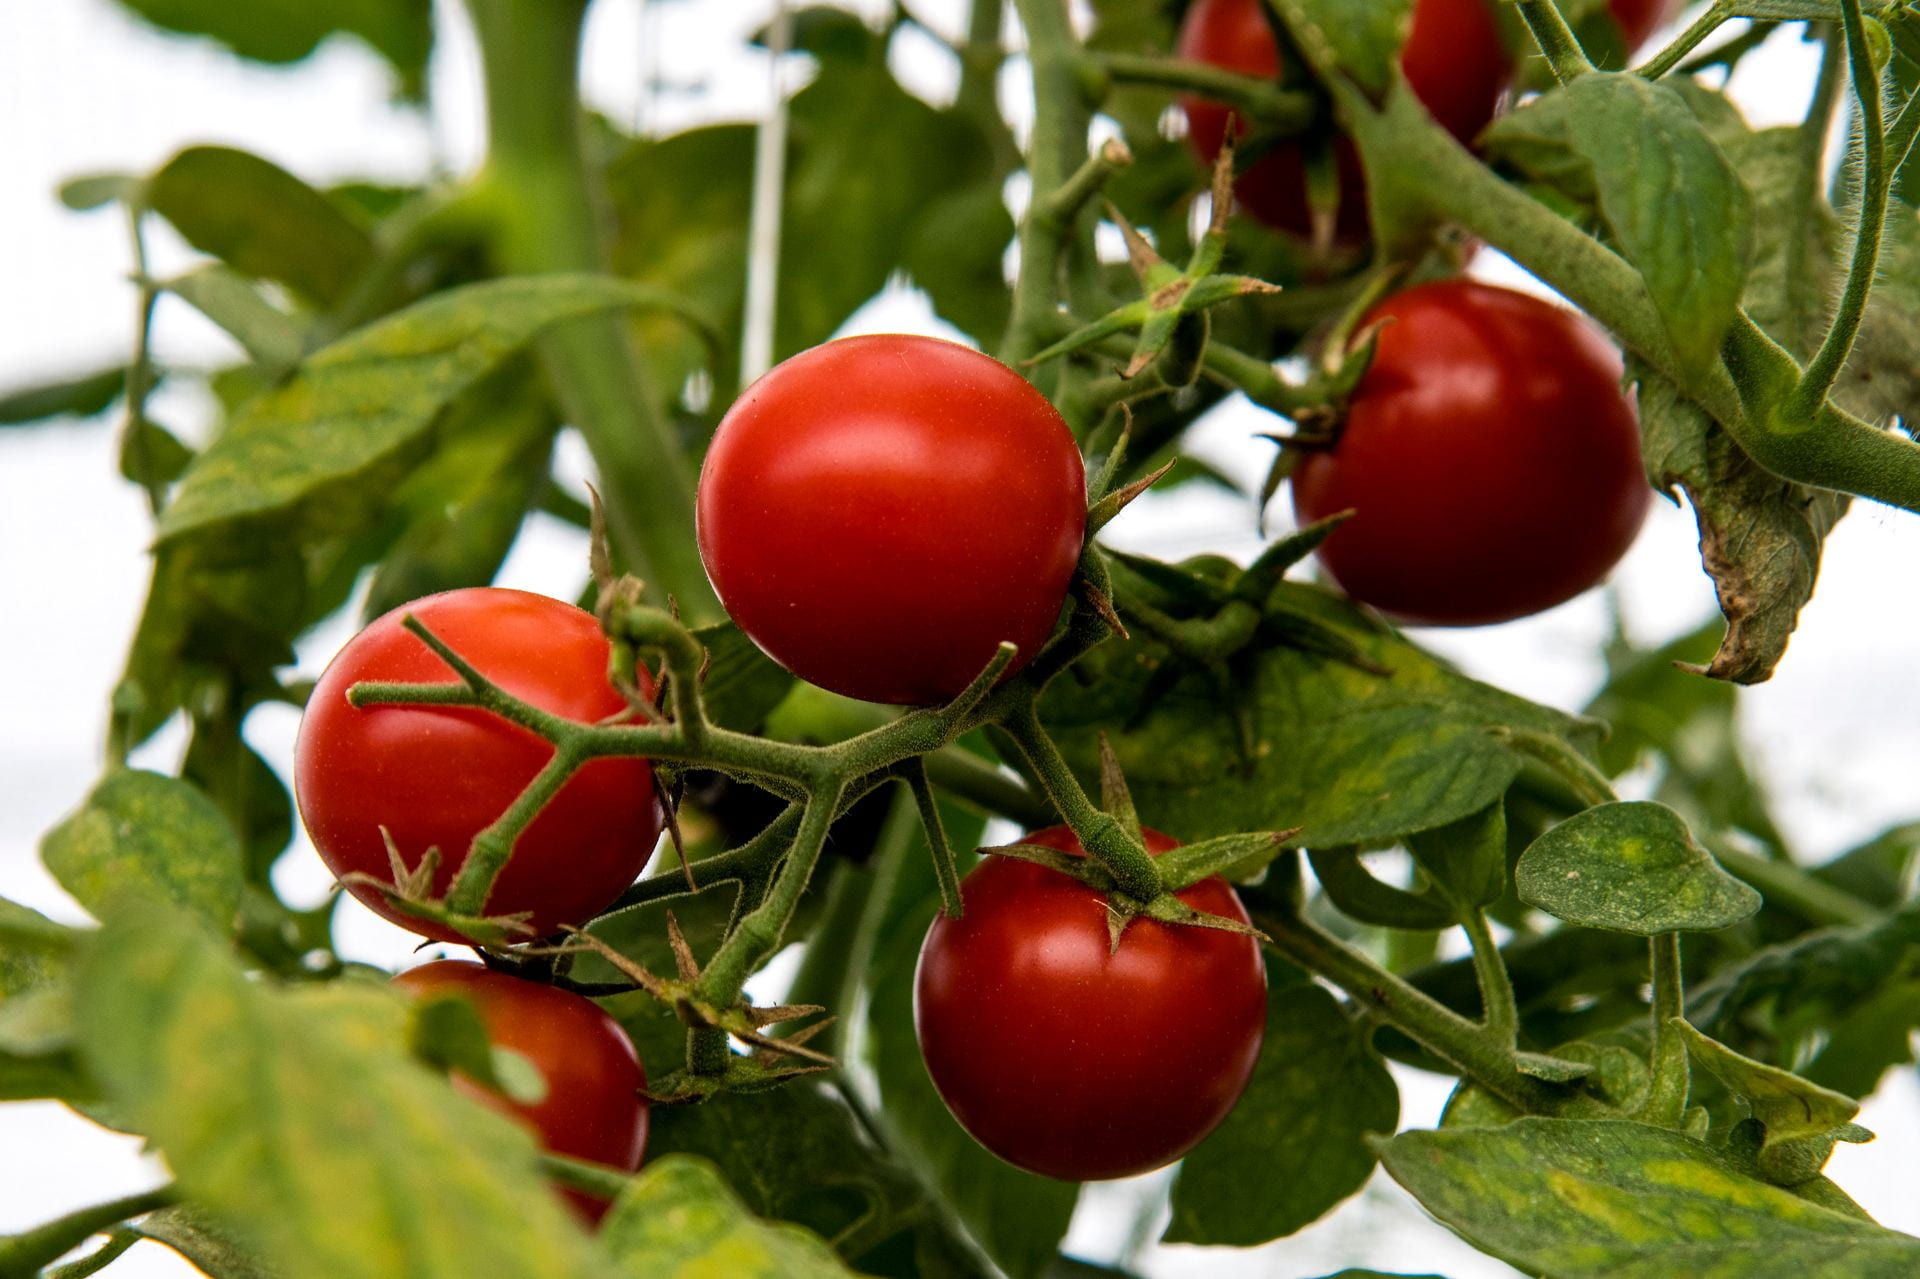 A close-up image of ripe cherry tomatoes on the vine